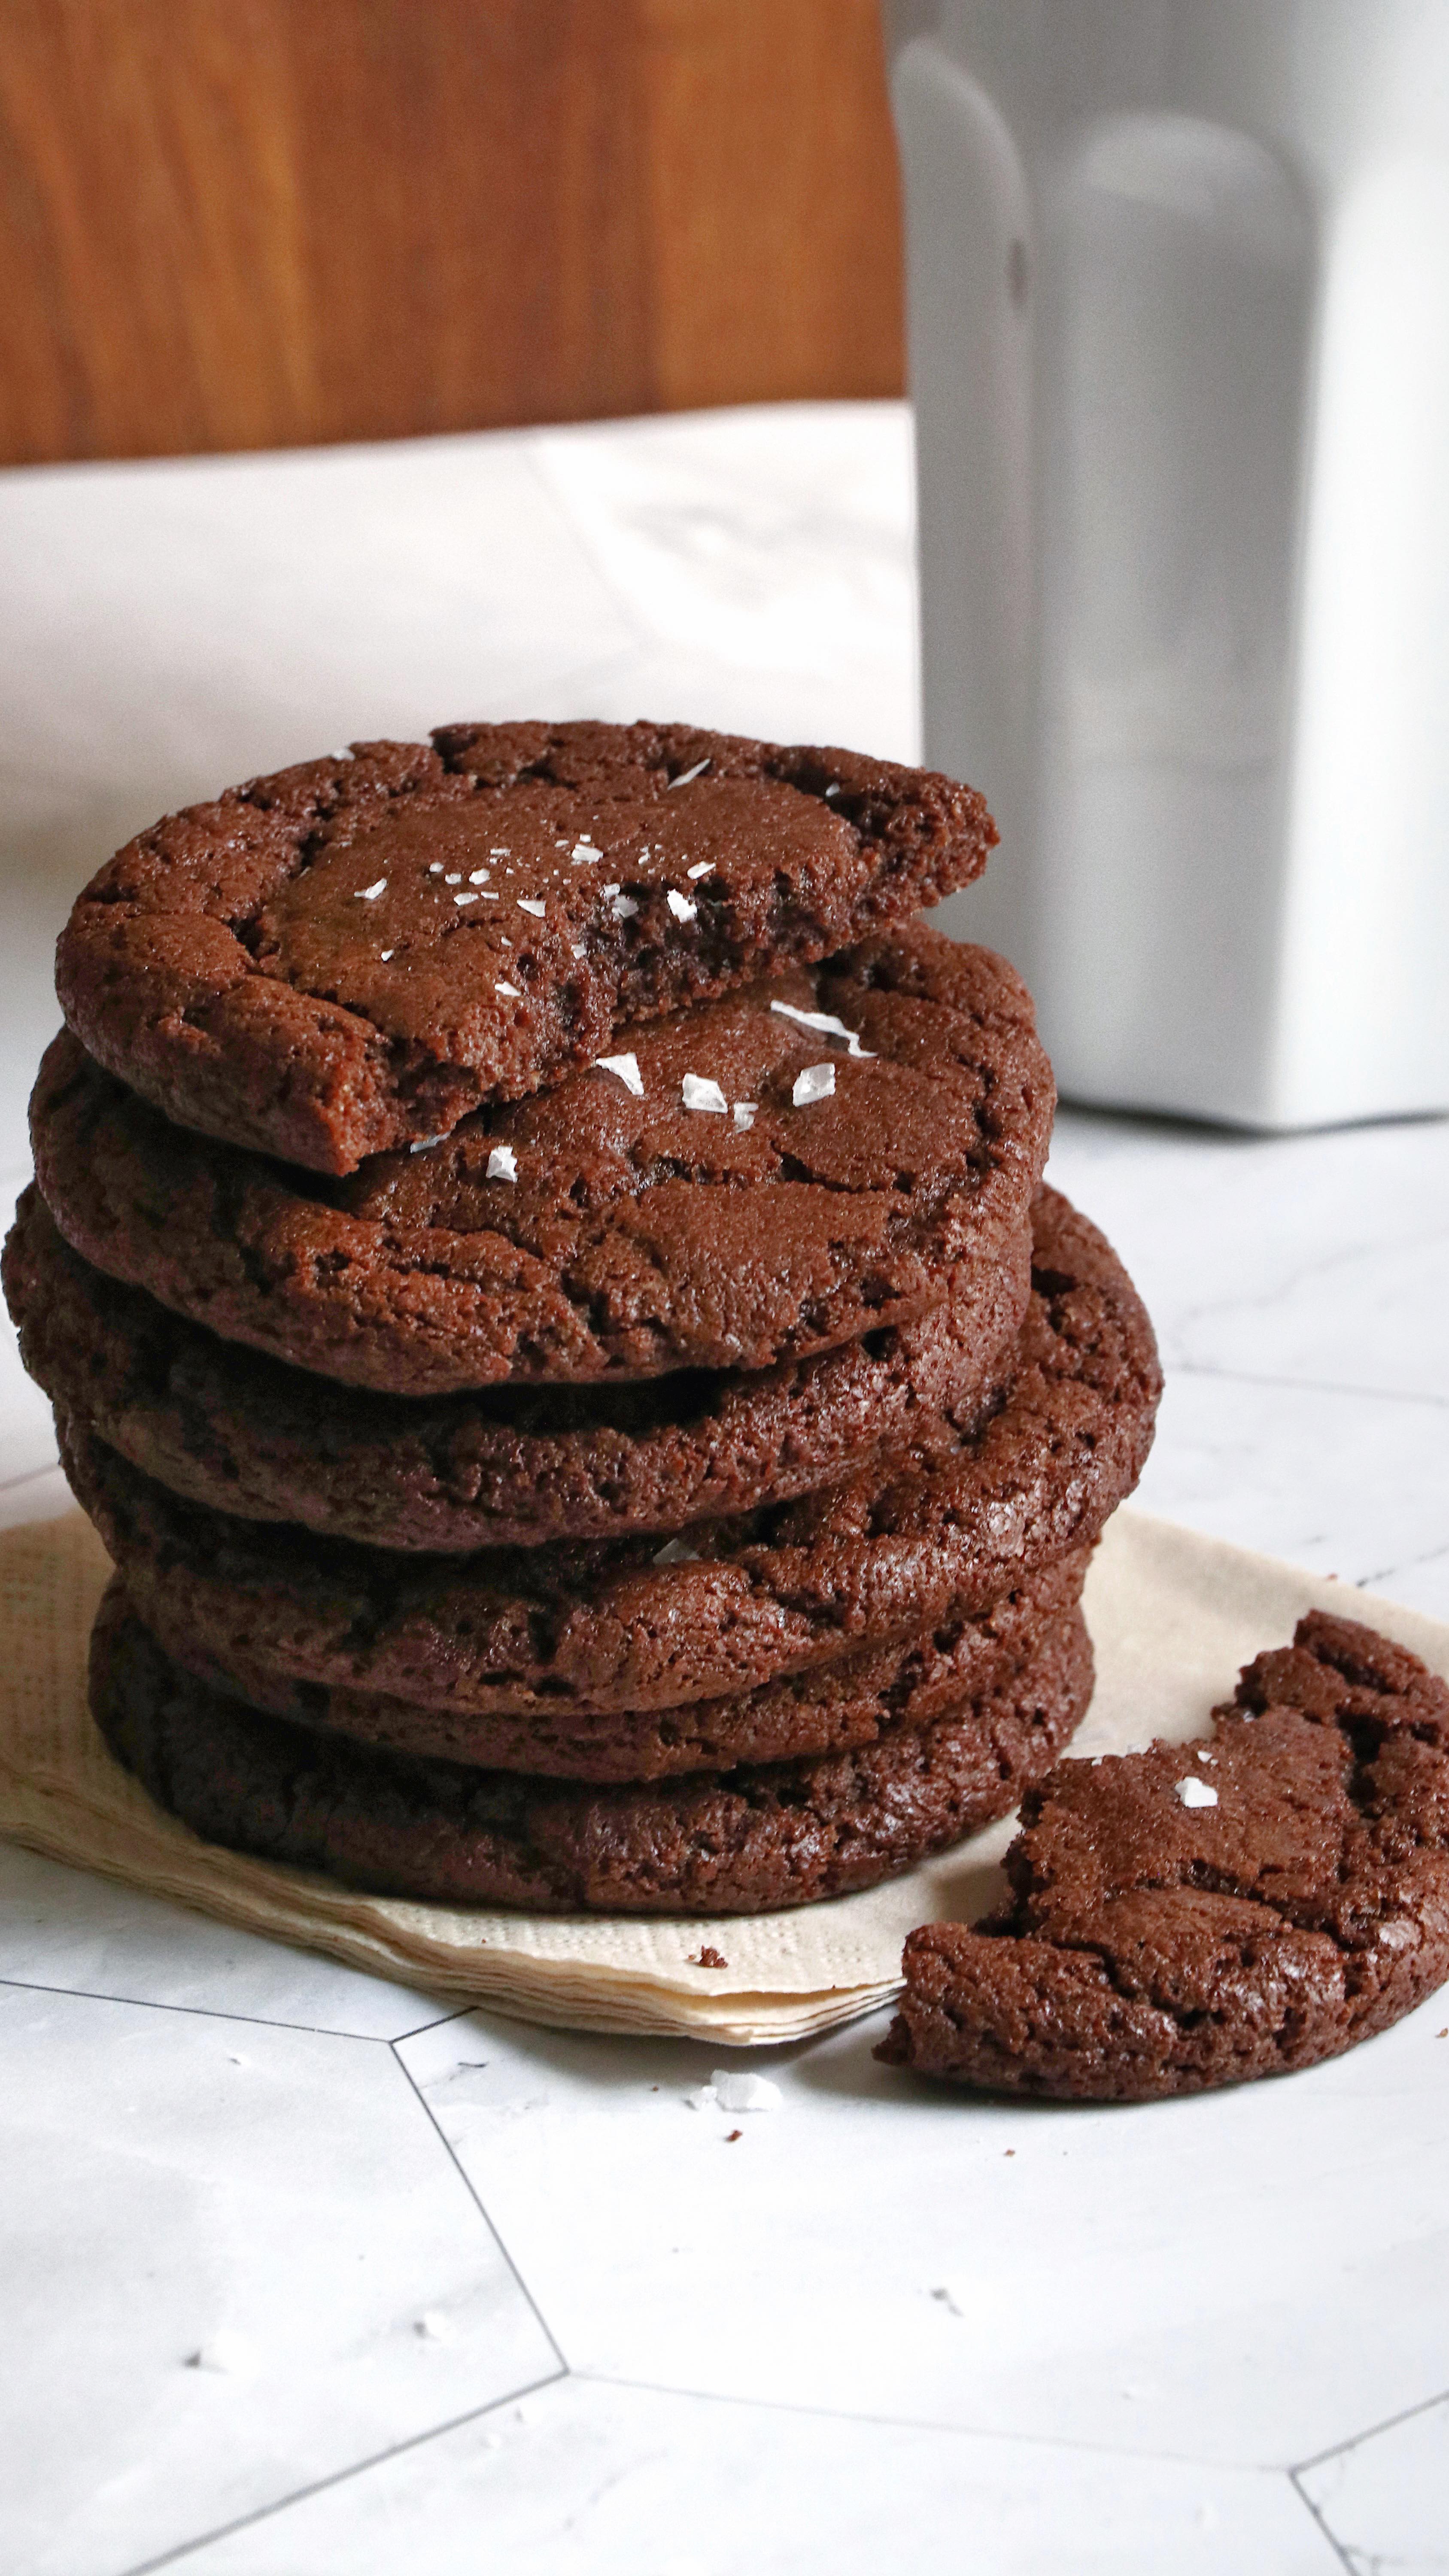 Salted Brownie Cookies, these are soft, chewy and really hard to resist 🤤🍪 

They are made with good quality melted chocolate which gives it a rich taste. 

I like to keep these simple without any additional mix-ins, and just a sprinkle of flaky sea salt on top 😍🧂 
.
I hope you’re as excited for the recipe as I am to share it with you all. Will post it very soon ❤️

Until then, do check out my other cookie recipes on the blog. Most of them are already tried and loved by  a handful of you 🤗 🍪

I always love seeing pictures of your creations so do DM me or post it using the hashtag #strawberrydesertwonders